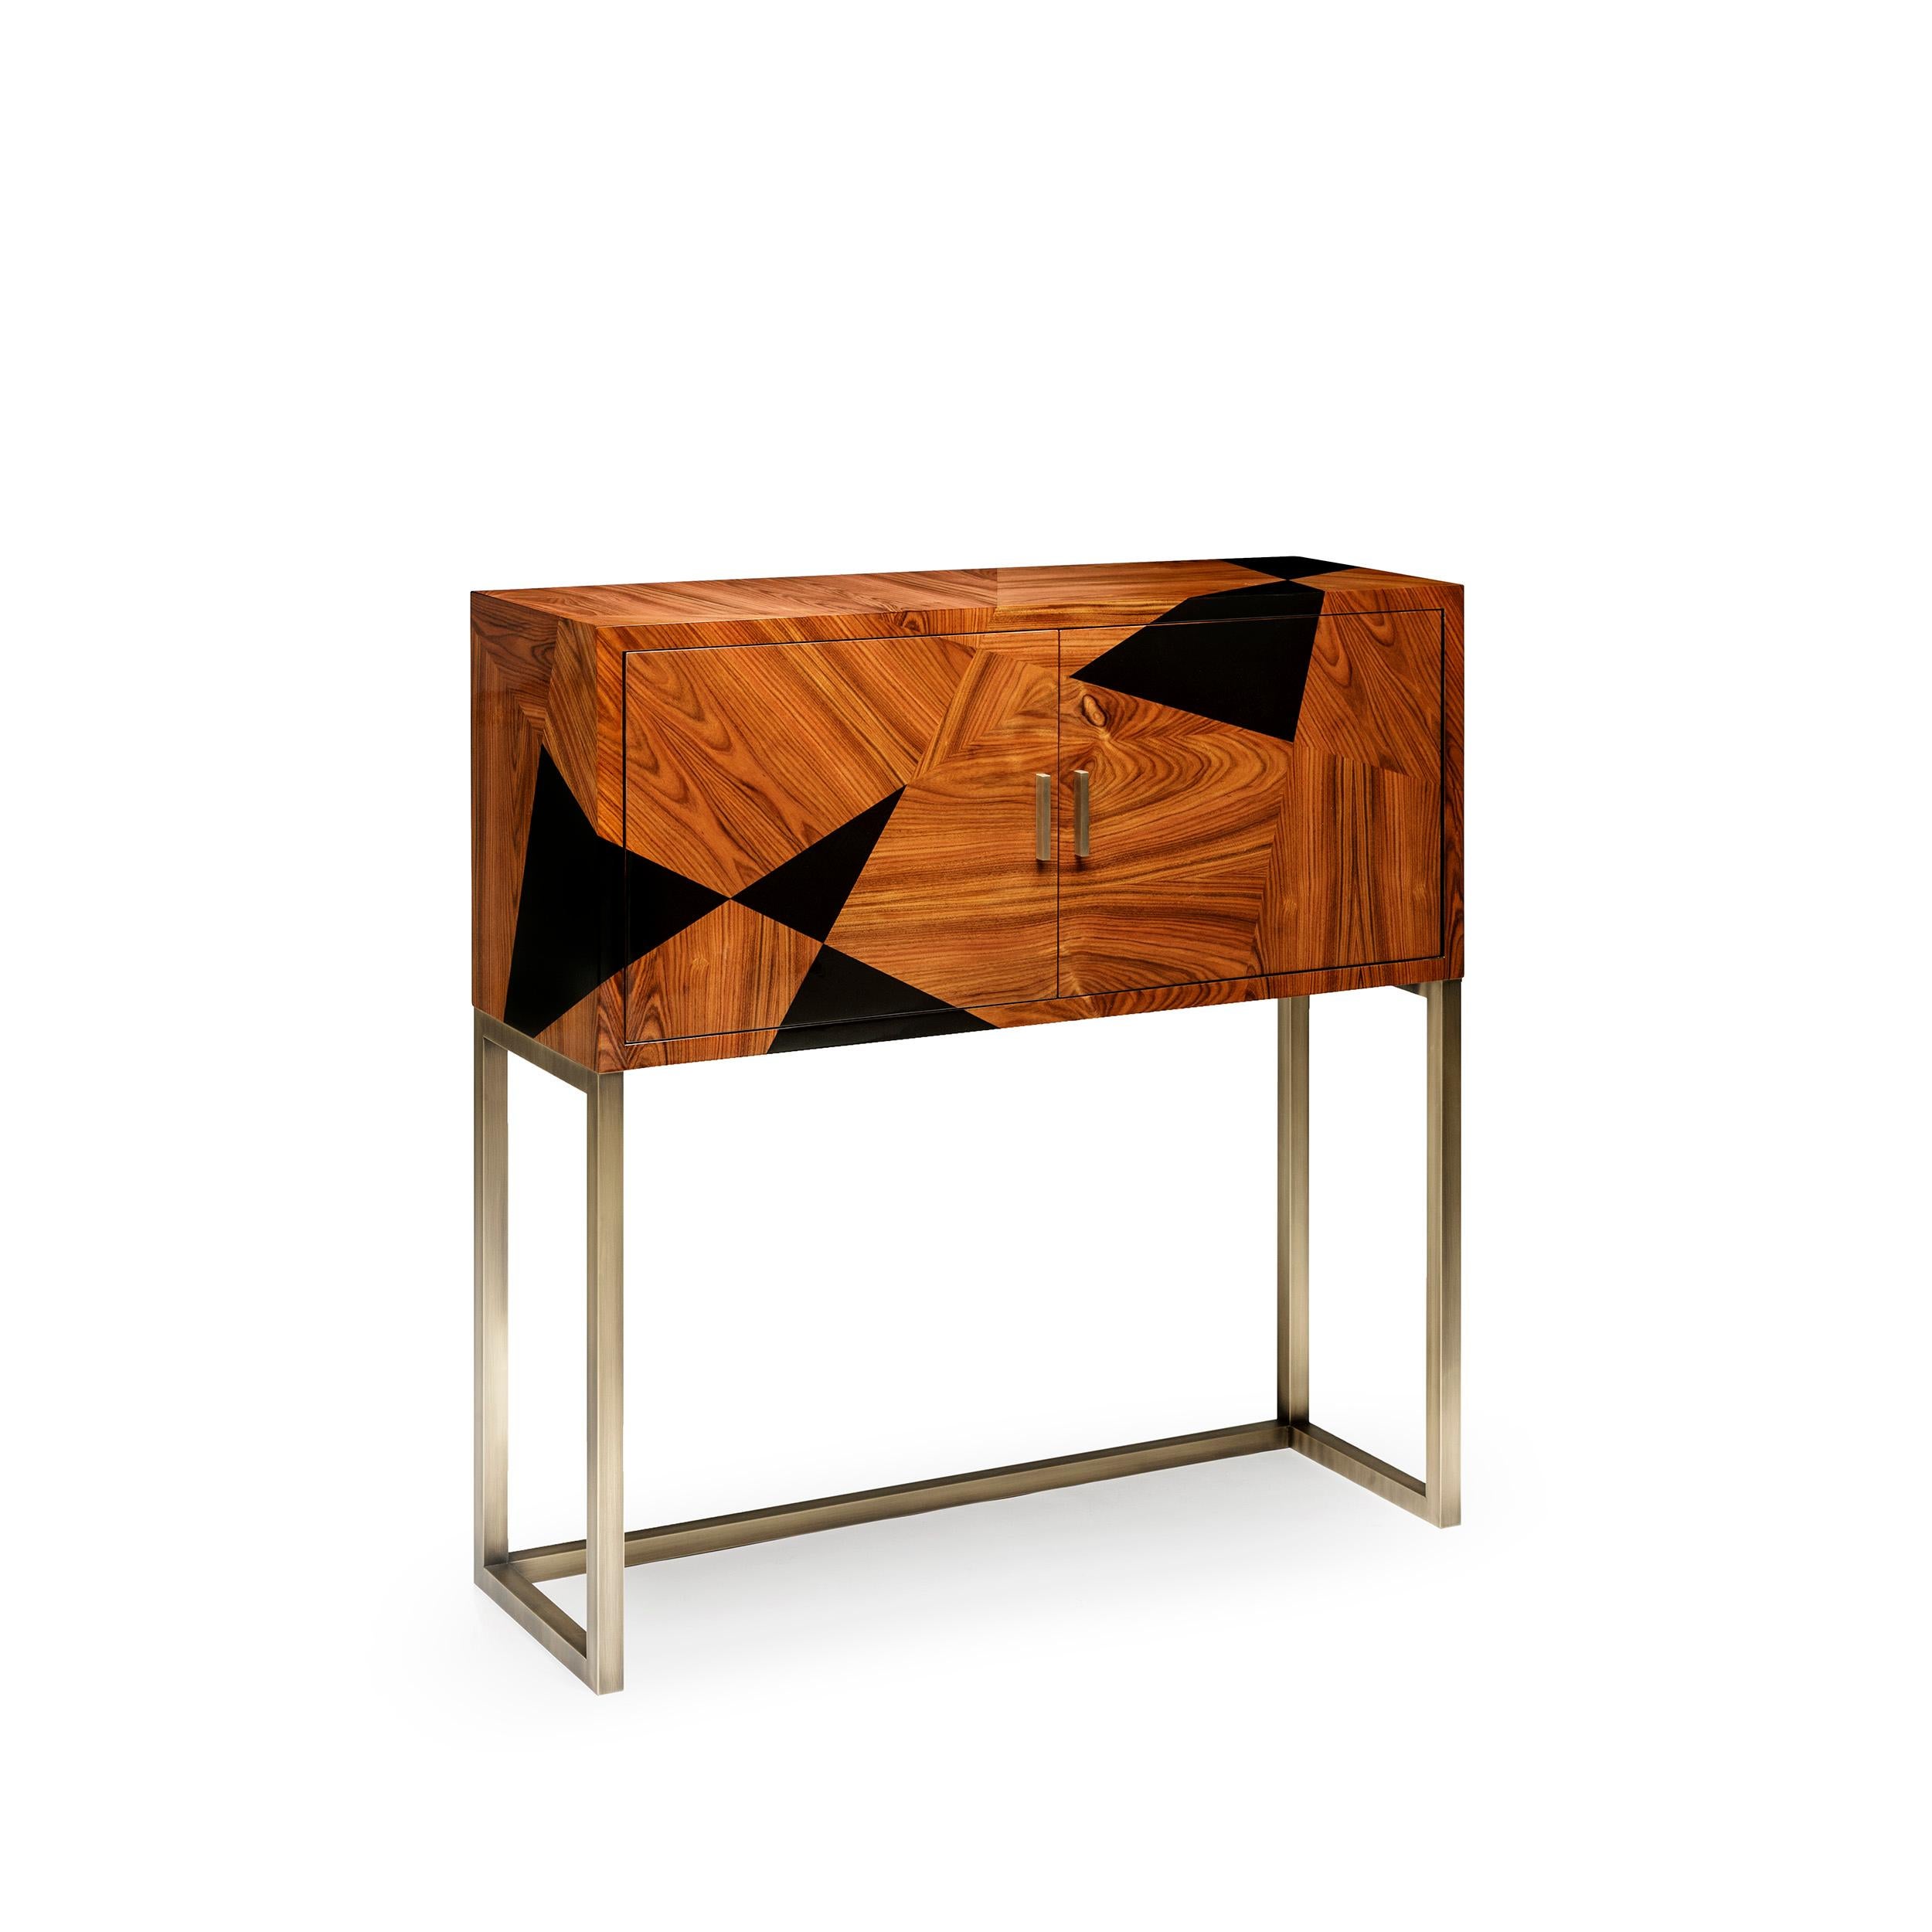 Geometry Cabinet, in Ebonized Sikomoro Wood, Handcrafted in Portugal by Duistt

The geometry cabinet uses the traditional marquetry technique in a contemporary design. the result on using contrasting woods and different orientation of the wood grain